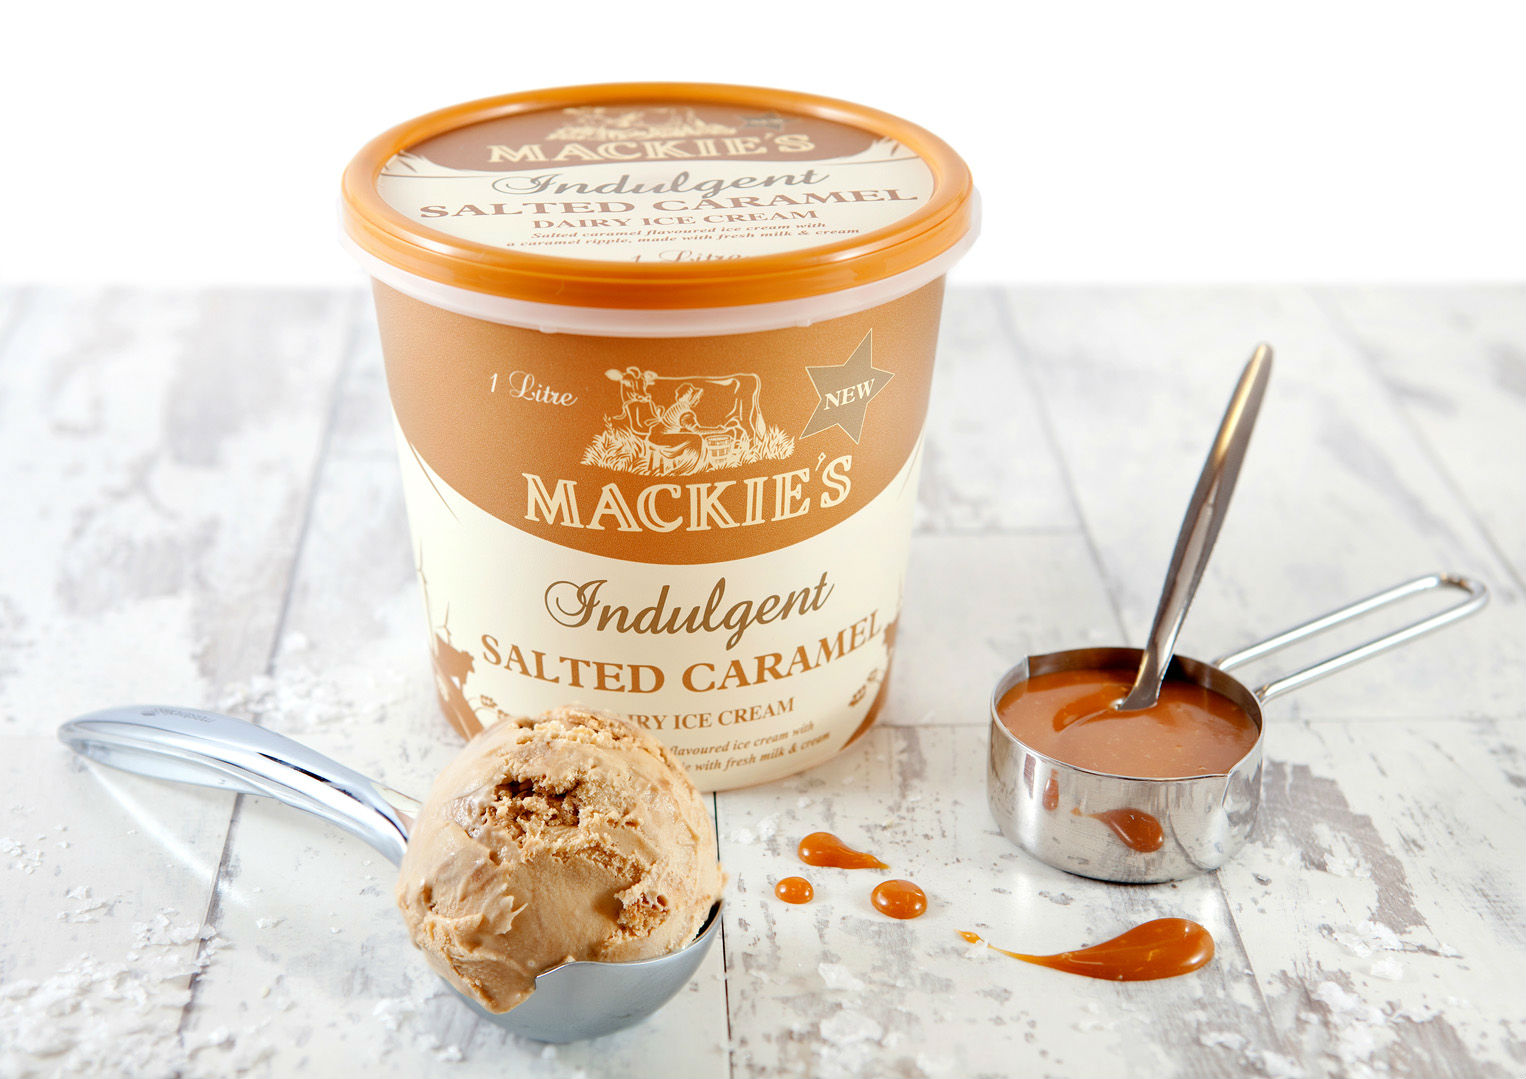 Mackie’s has it licked - ice cream sales soared by 35% this summer